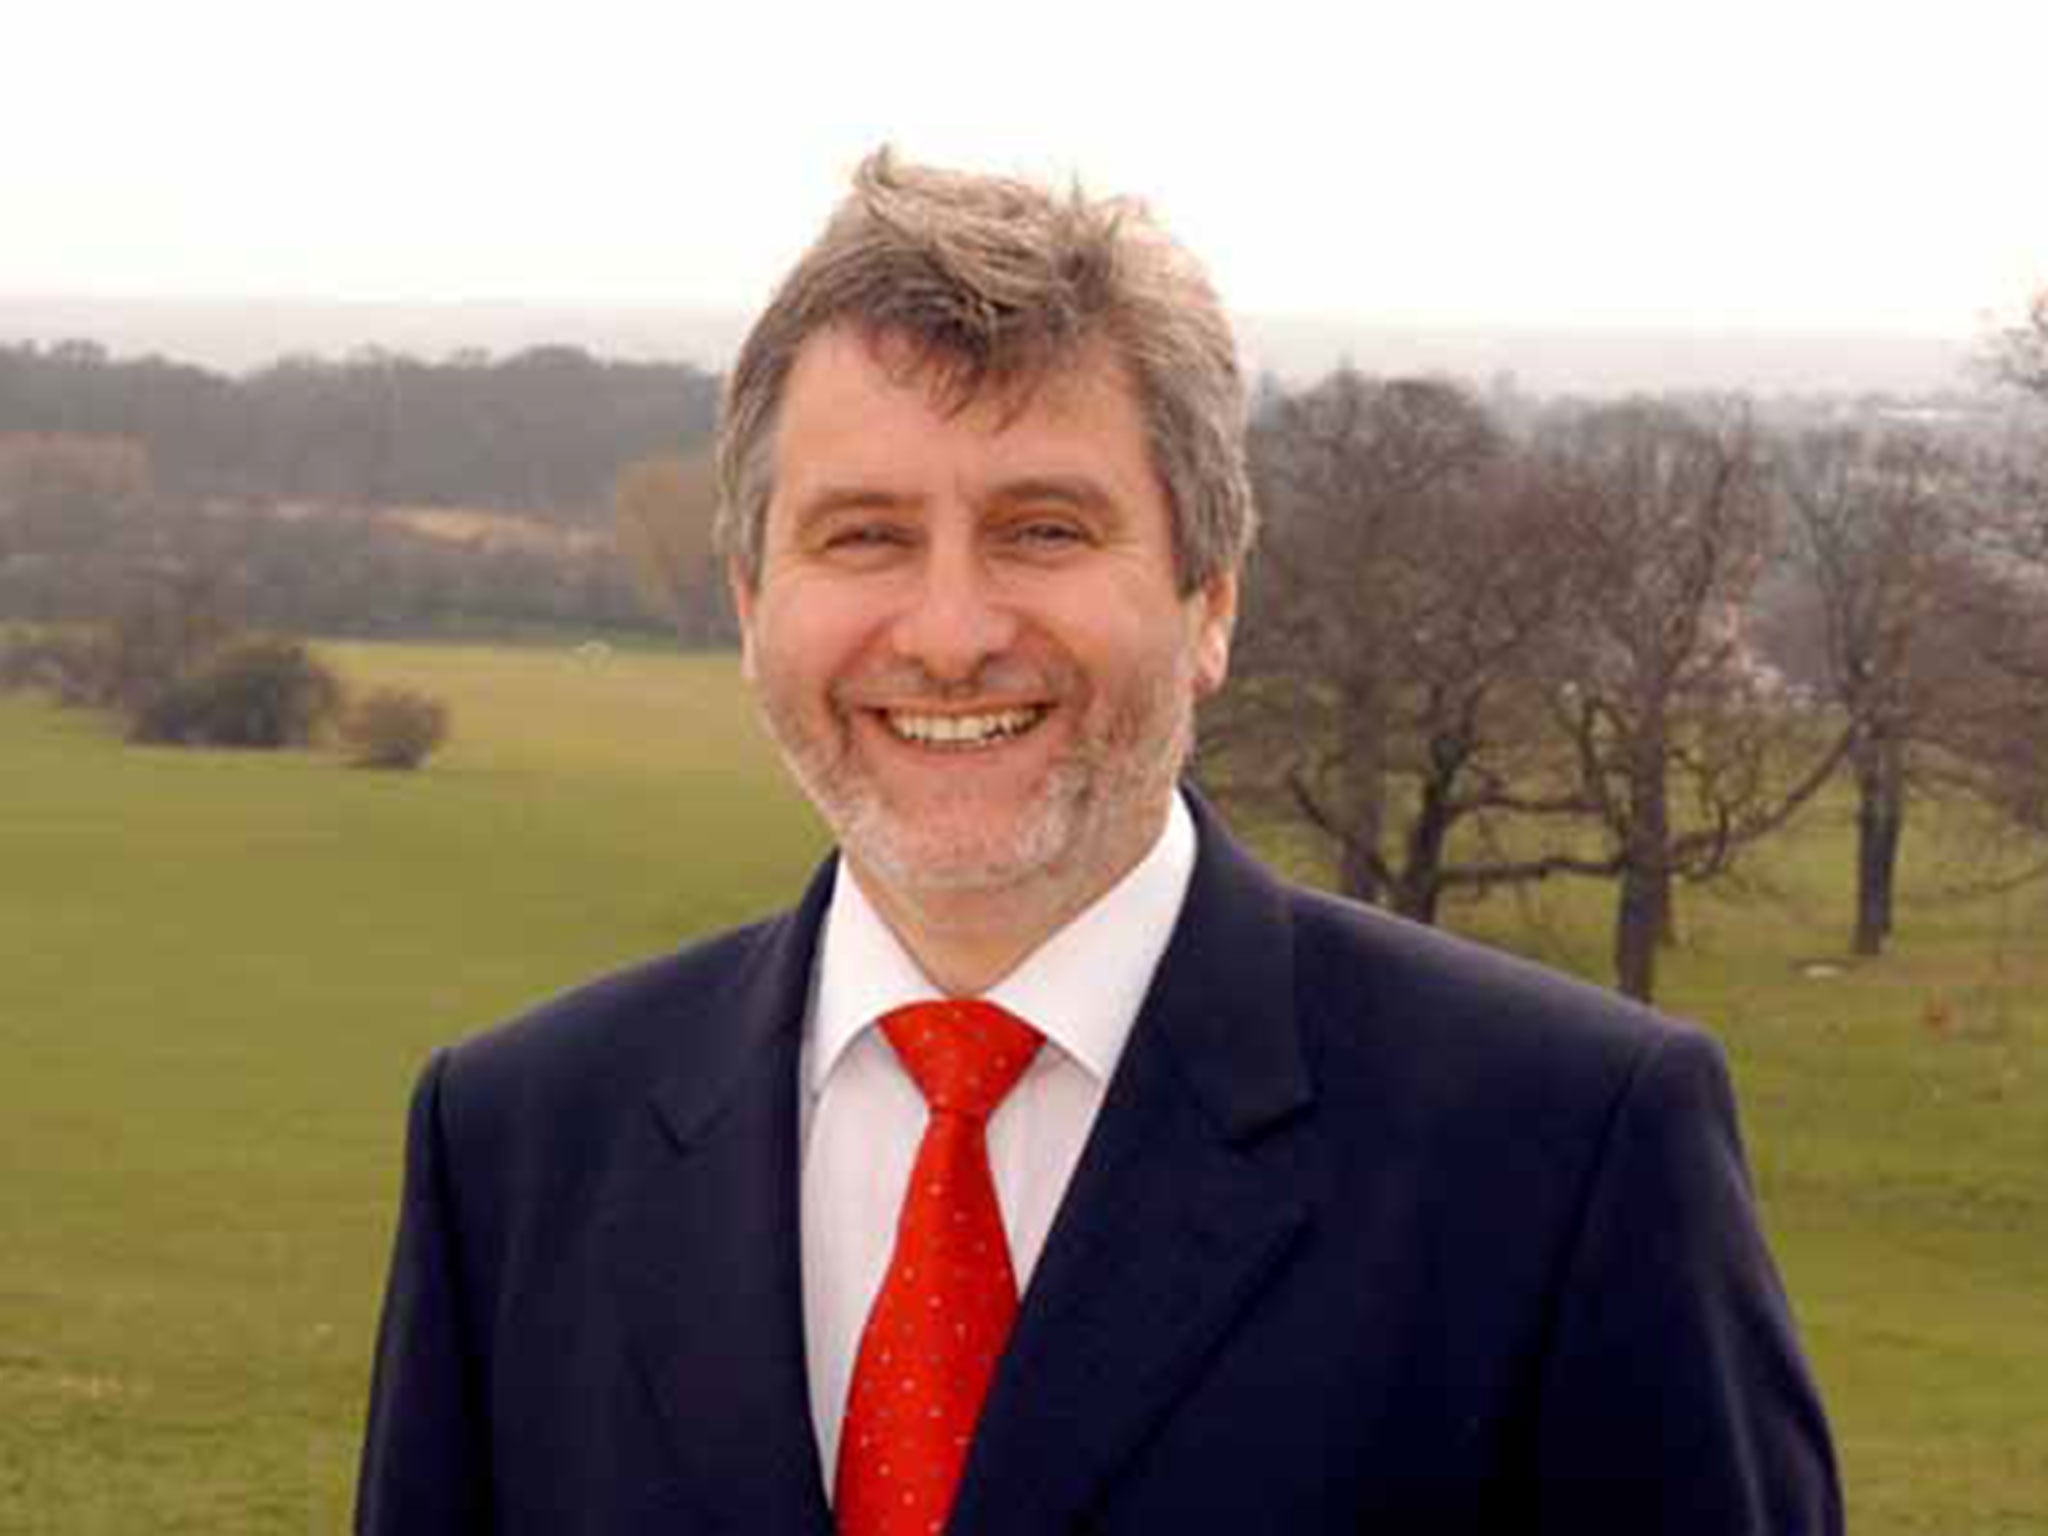 The 48-year-old MP for Eltham is a lifelong Millwall supporter and qualified football coach